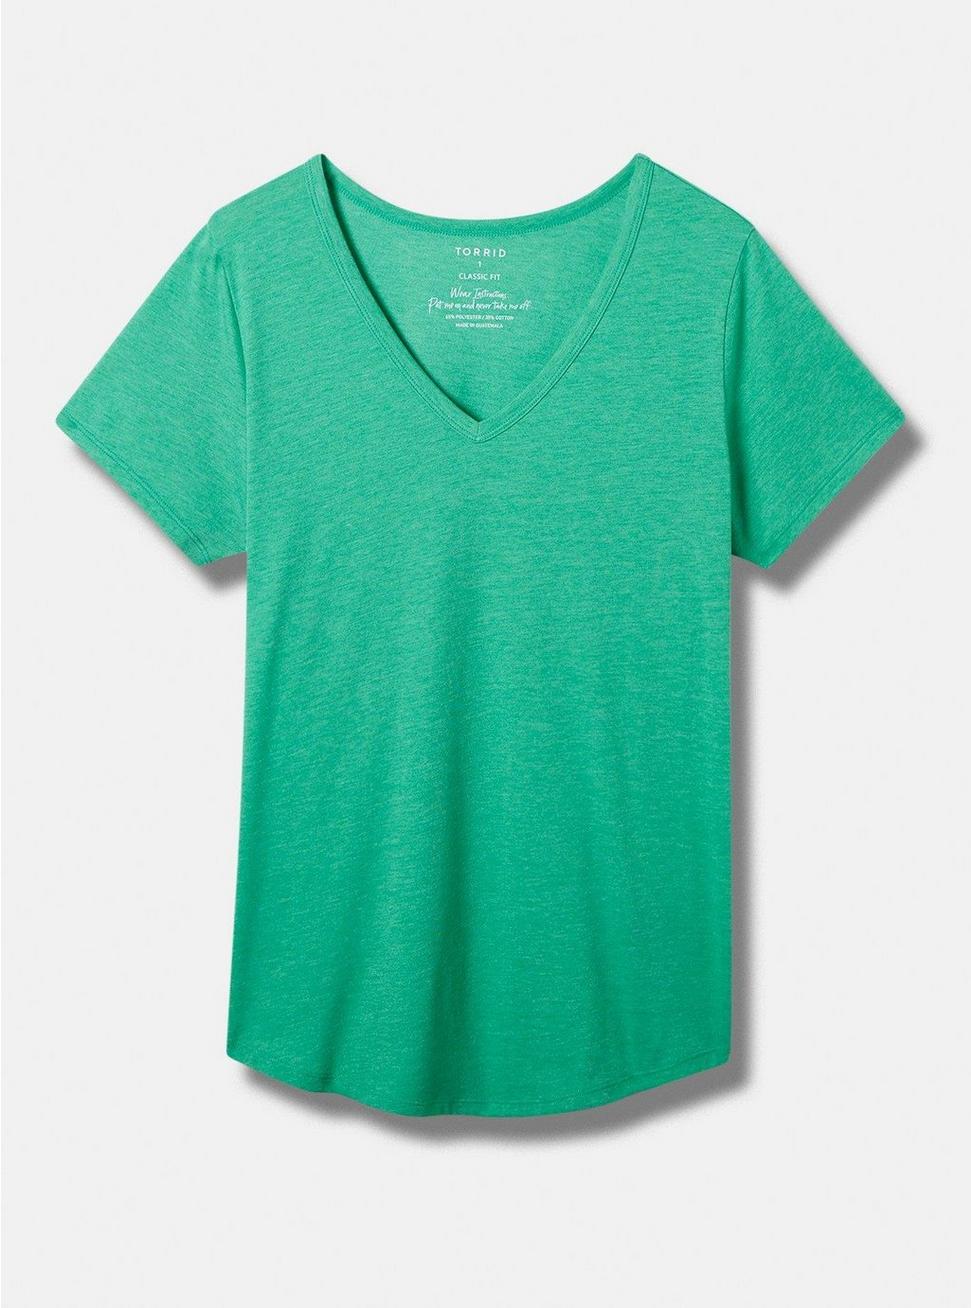 Girlfriend Signature Jersey V-Neck Tee, JELLY BEAN, hi-res